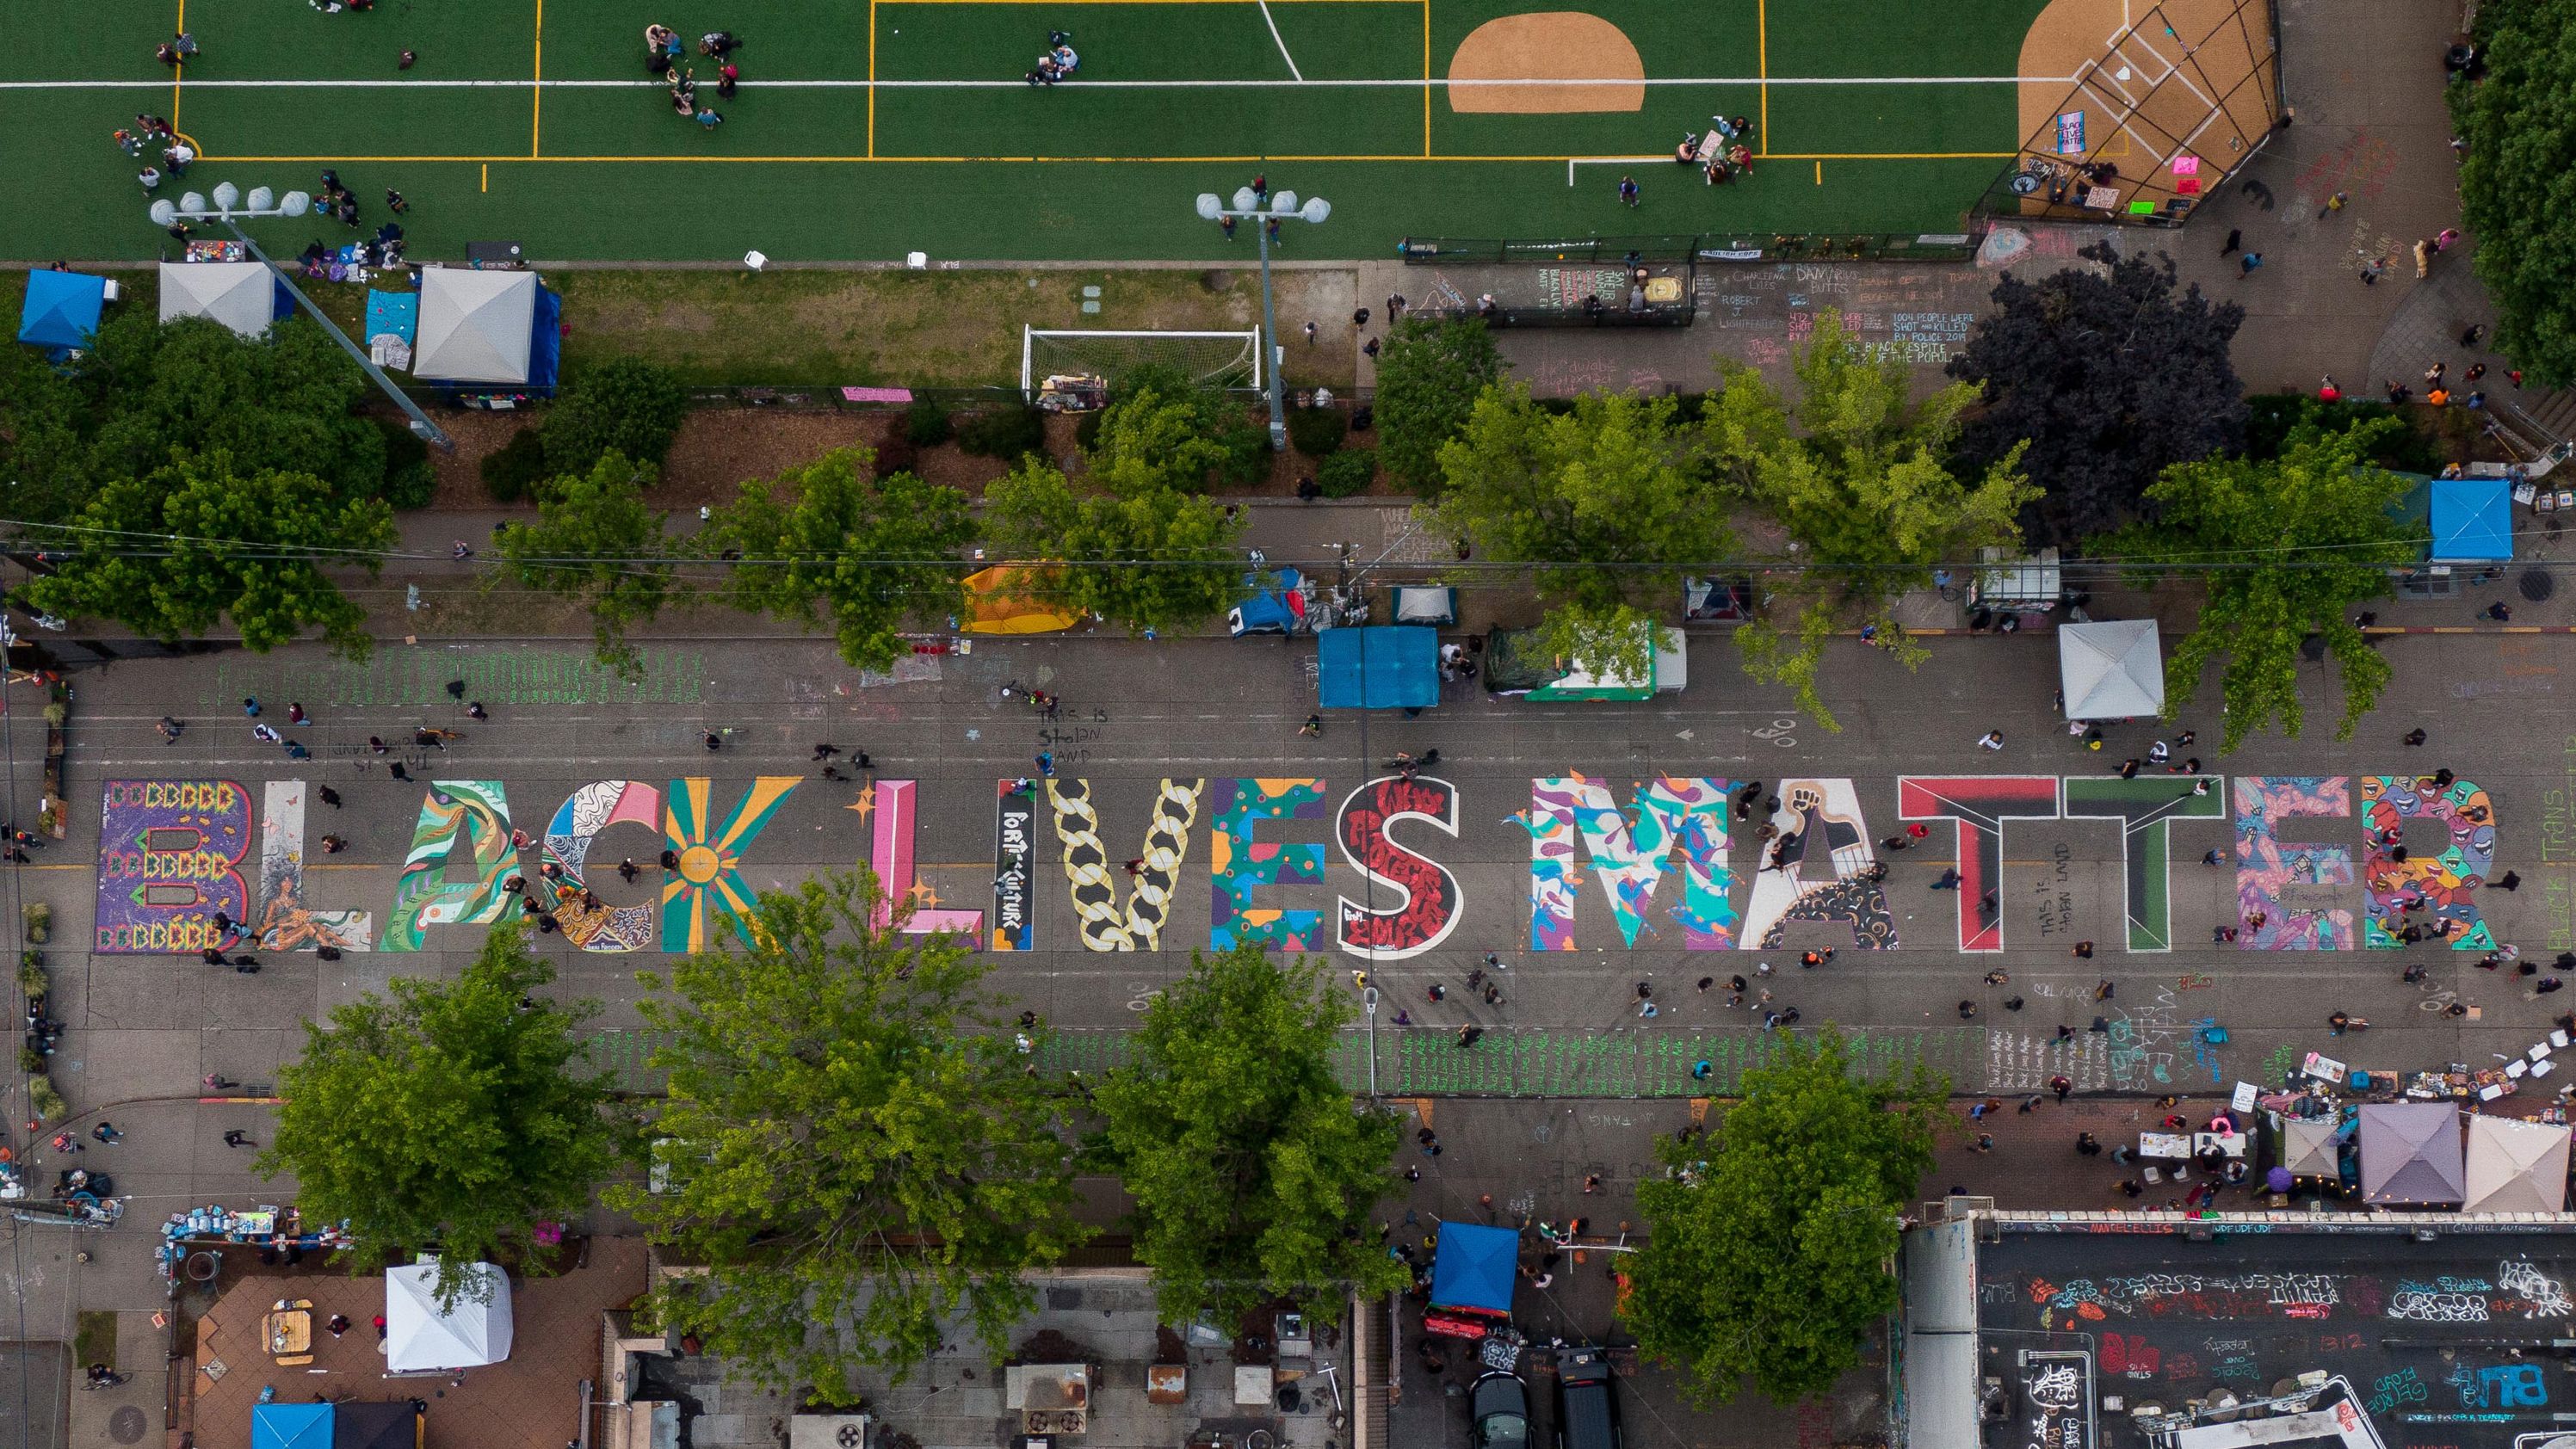 This aerial photo shows a Black Lives Matter mural in Seattle on June 14. Barricades and street graffiti mark the entrance to what's known as Seattle's Capitol Hill Autonomous Zone, which <a href="https://www.cnn.com/2020/06/15/us/seattle-capitol-hill-autonomous-zone-monday/index.html" target="_blank">protesters have occupied</a> since June 7.